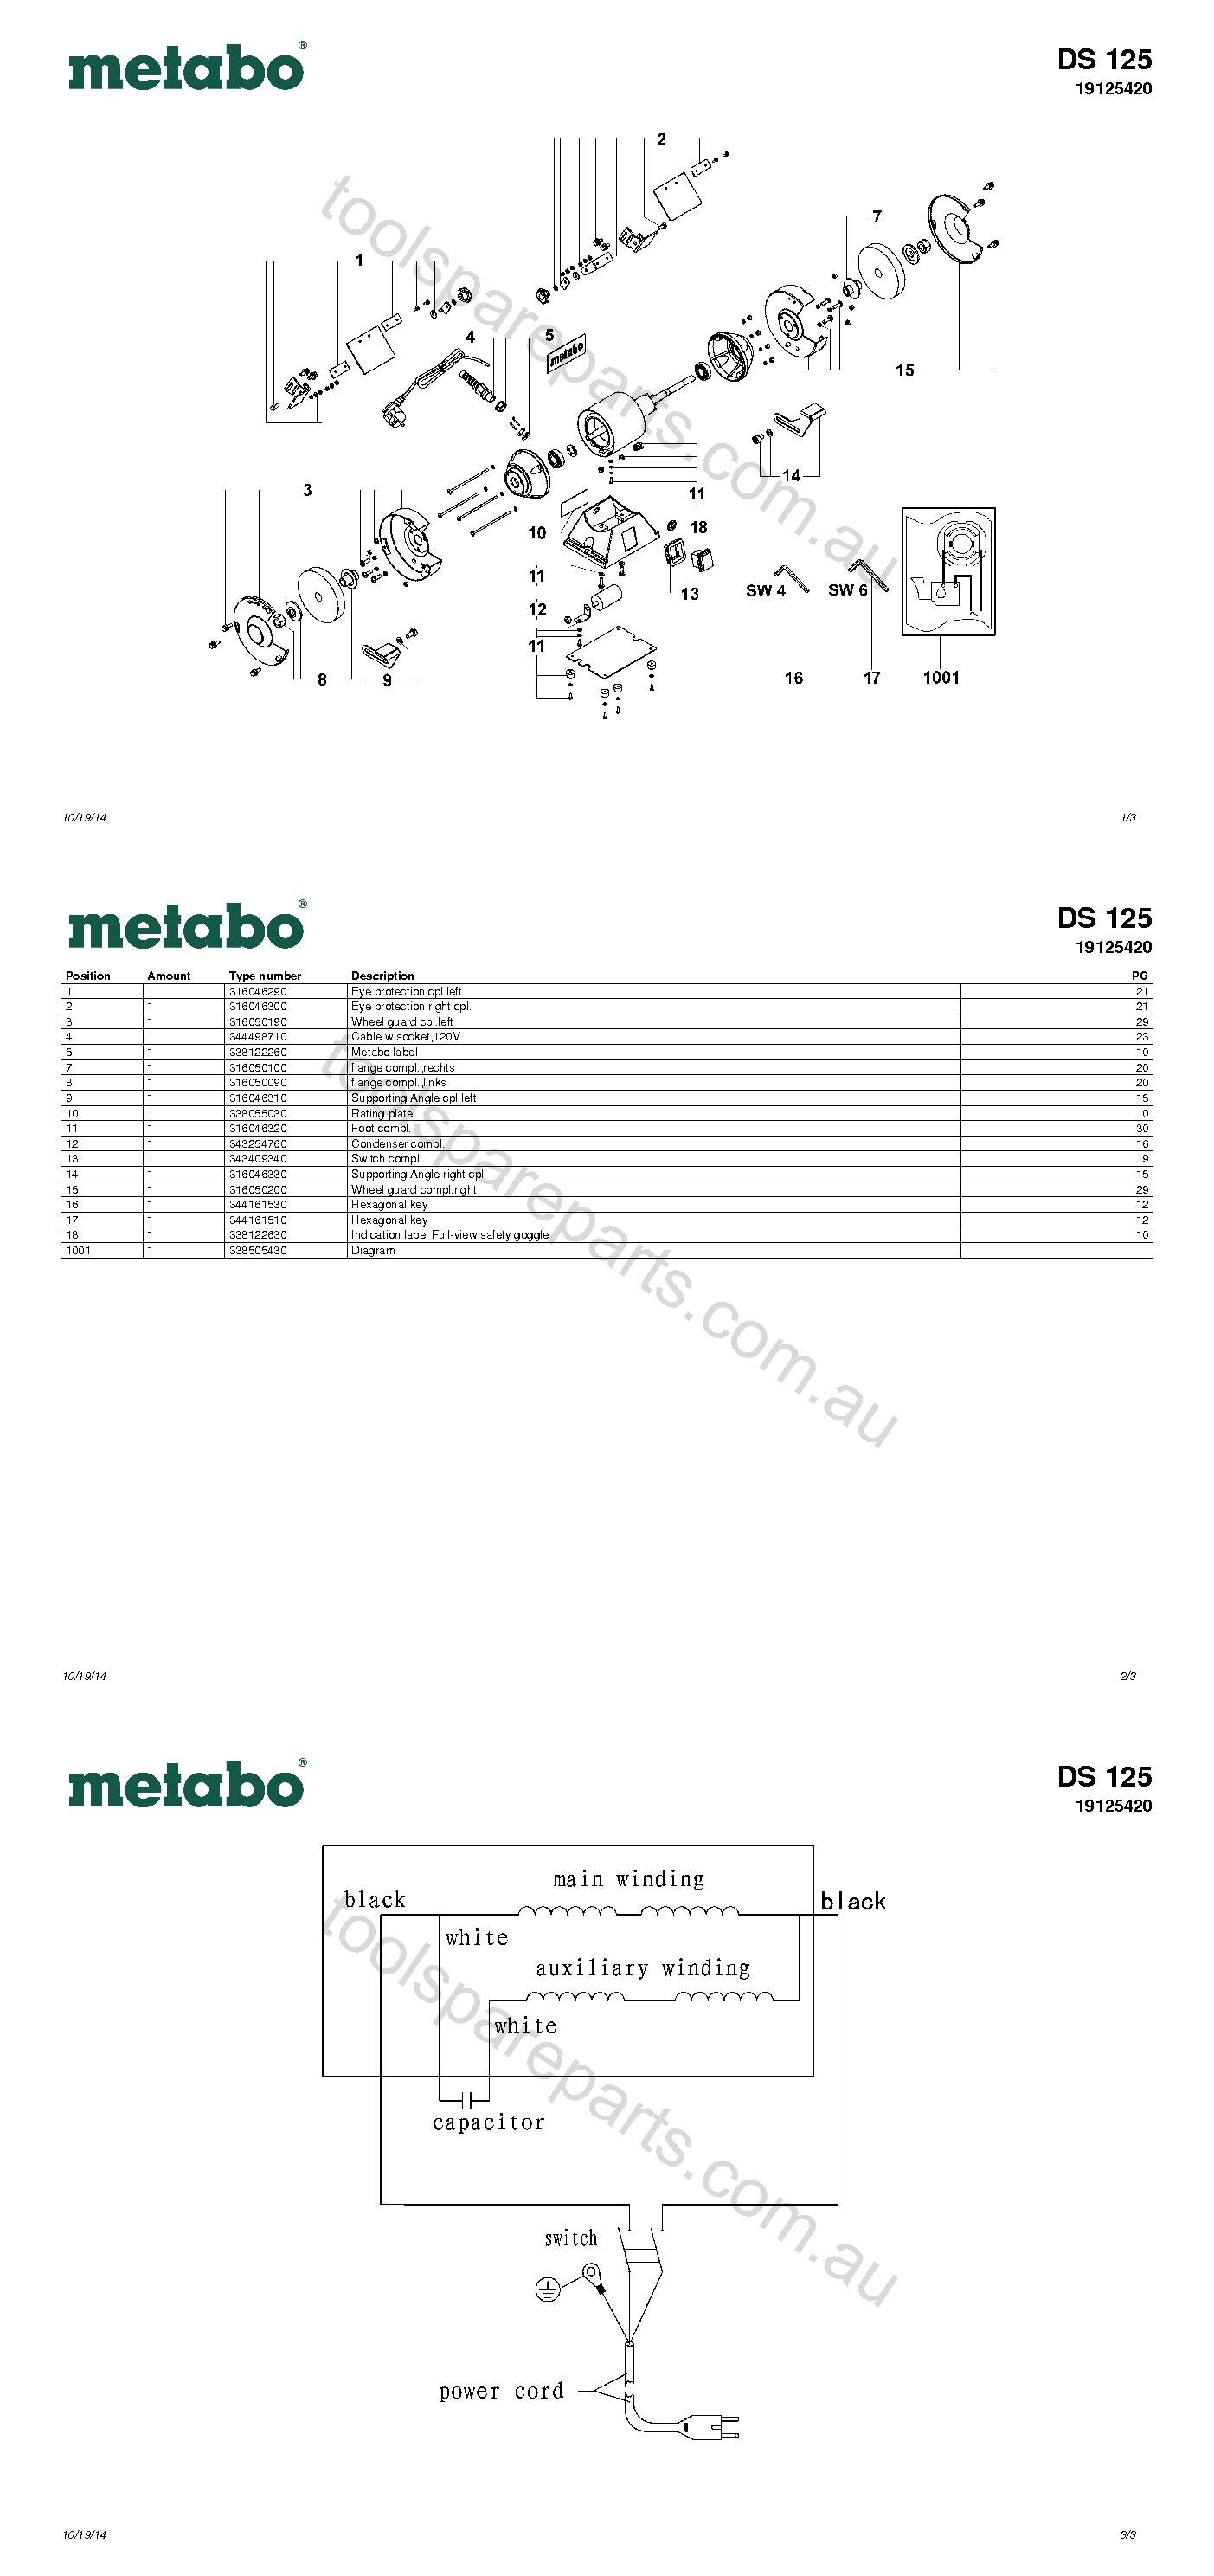 Metabo DS 125 19125420  Diagram 1